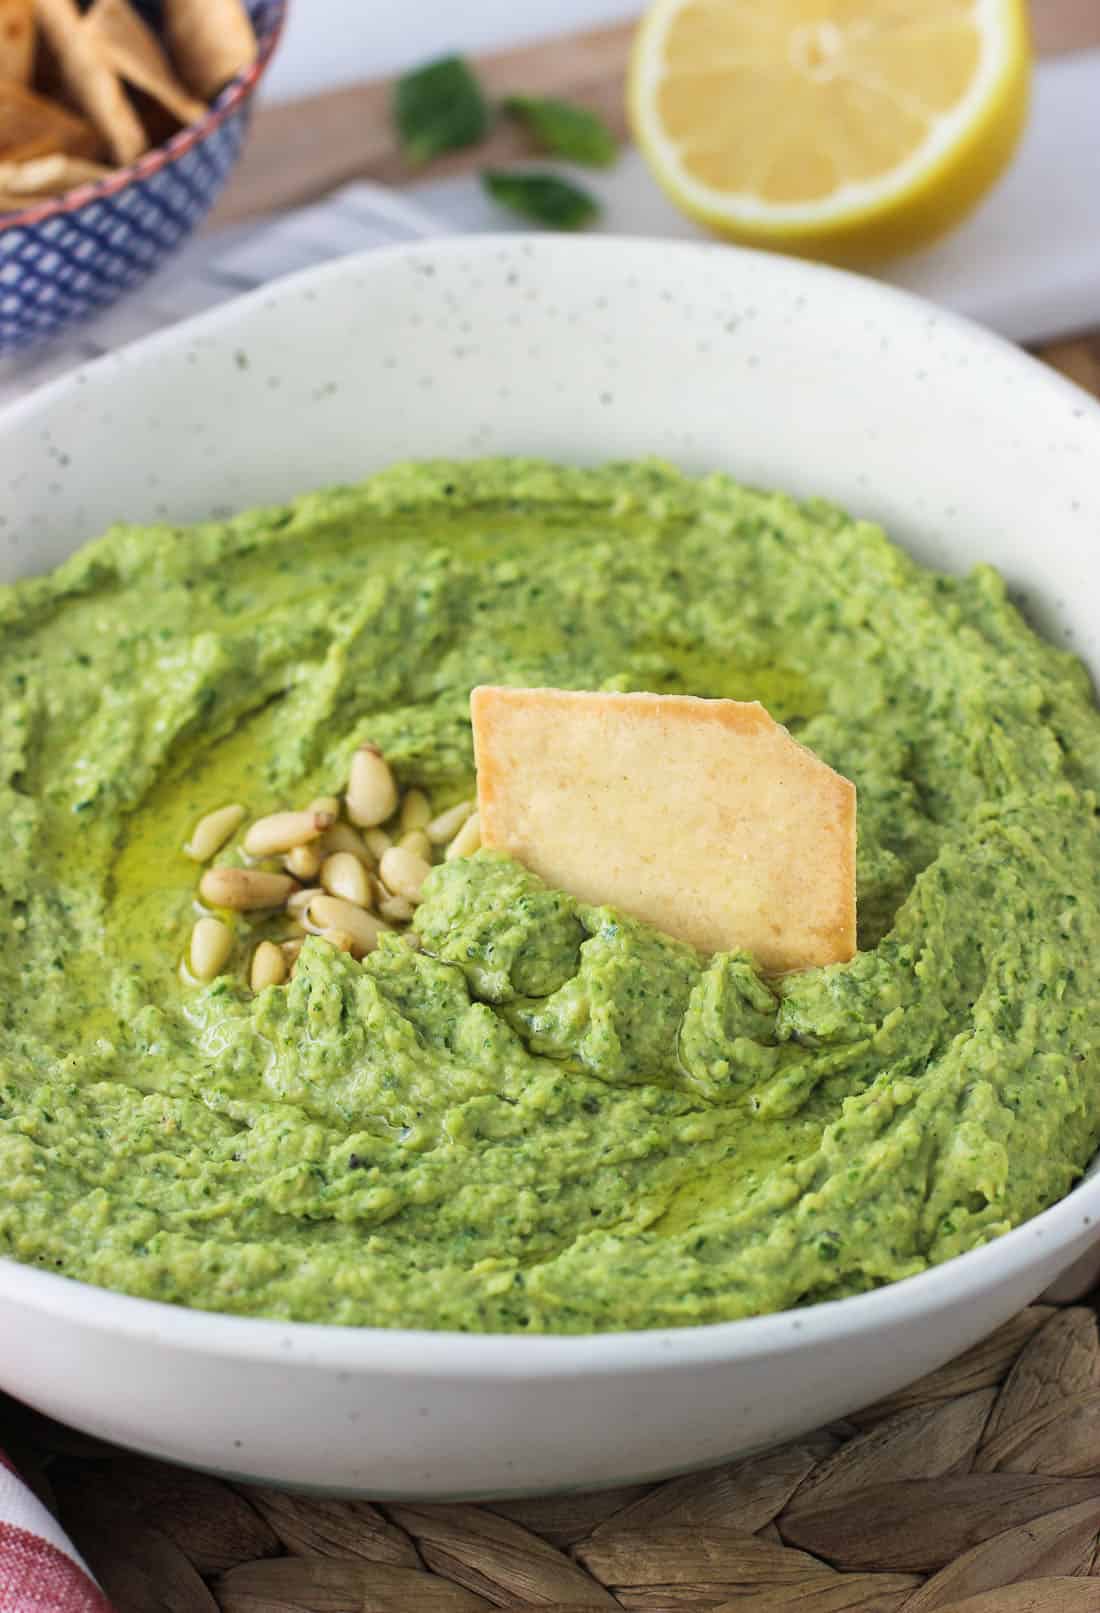 A pita chip dunked into a bowl of hummus ready to scoop